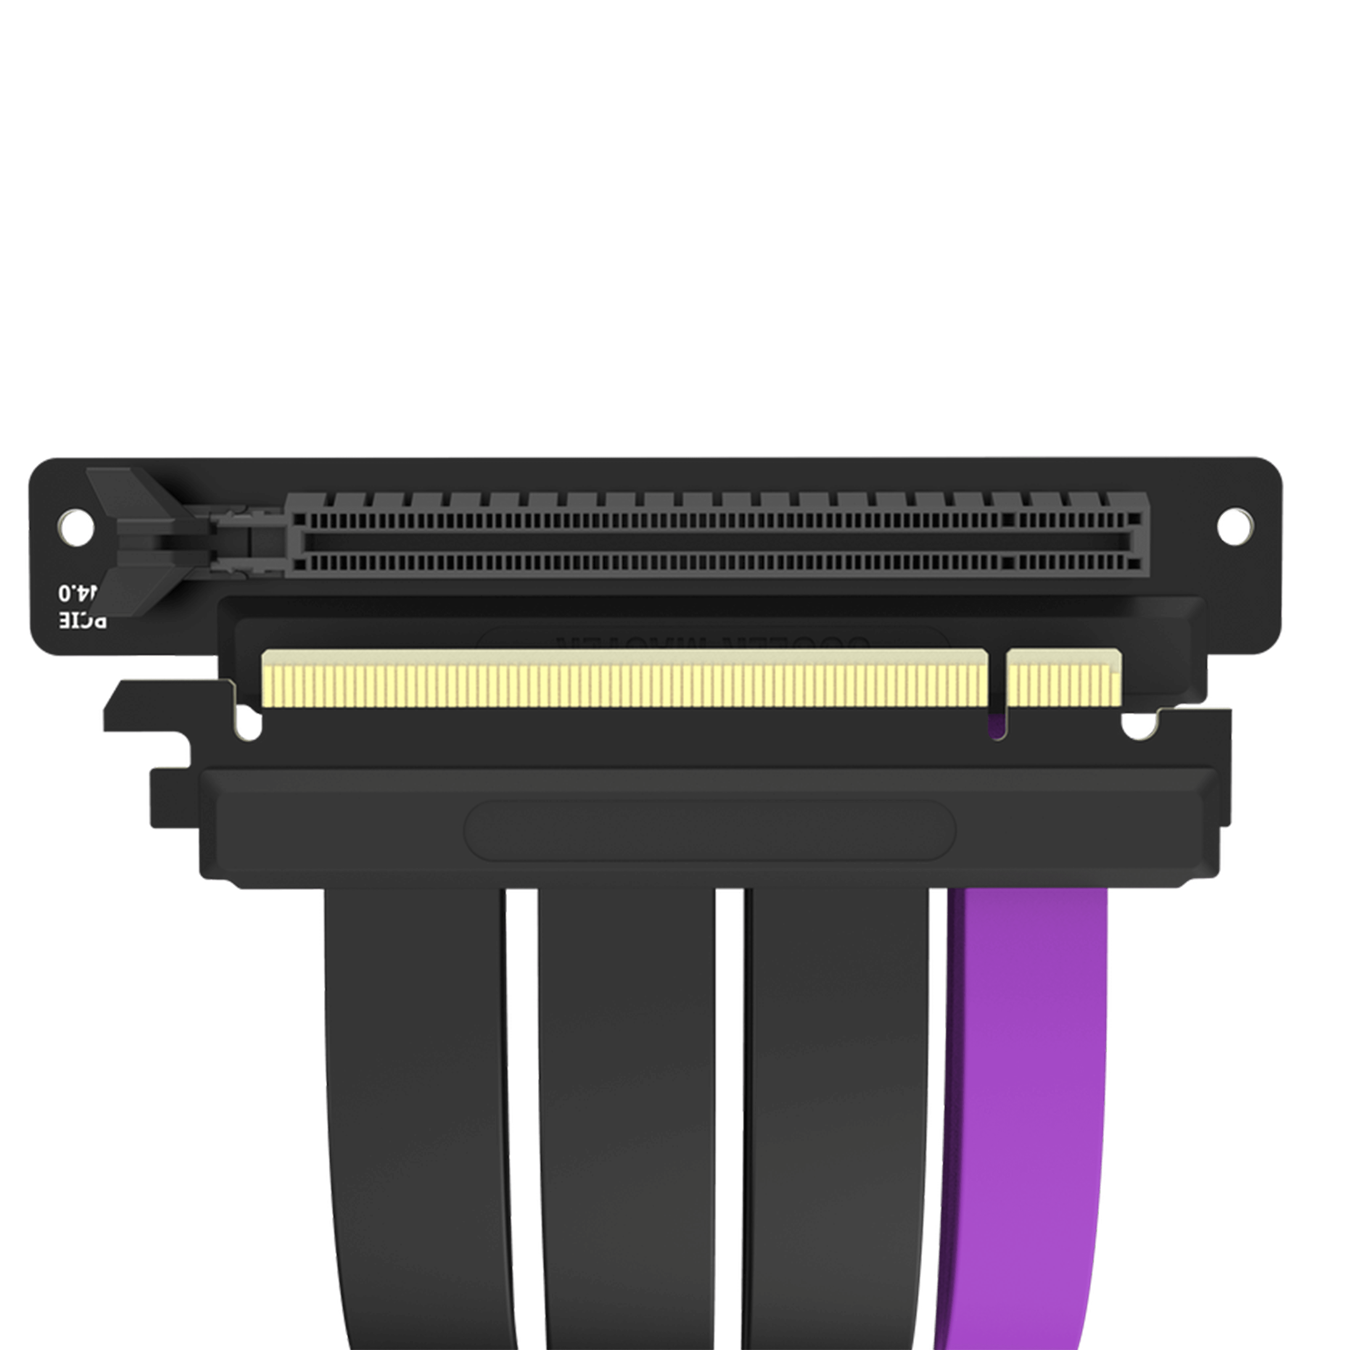 COOLER MASTER ACCESSORY RISER CABLE PCIE 4.0 X16 200mm